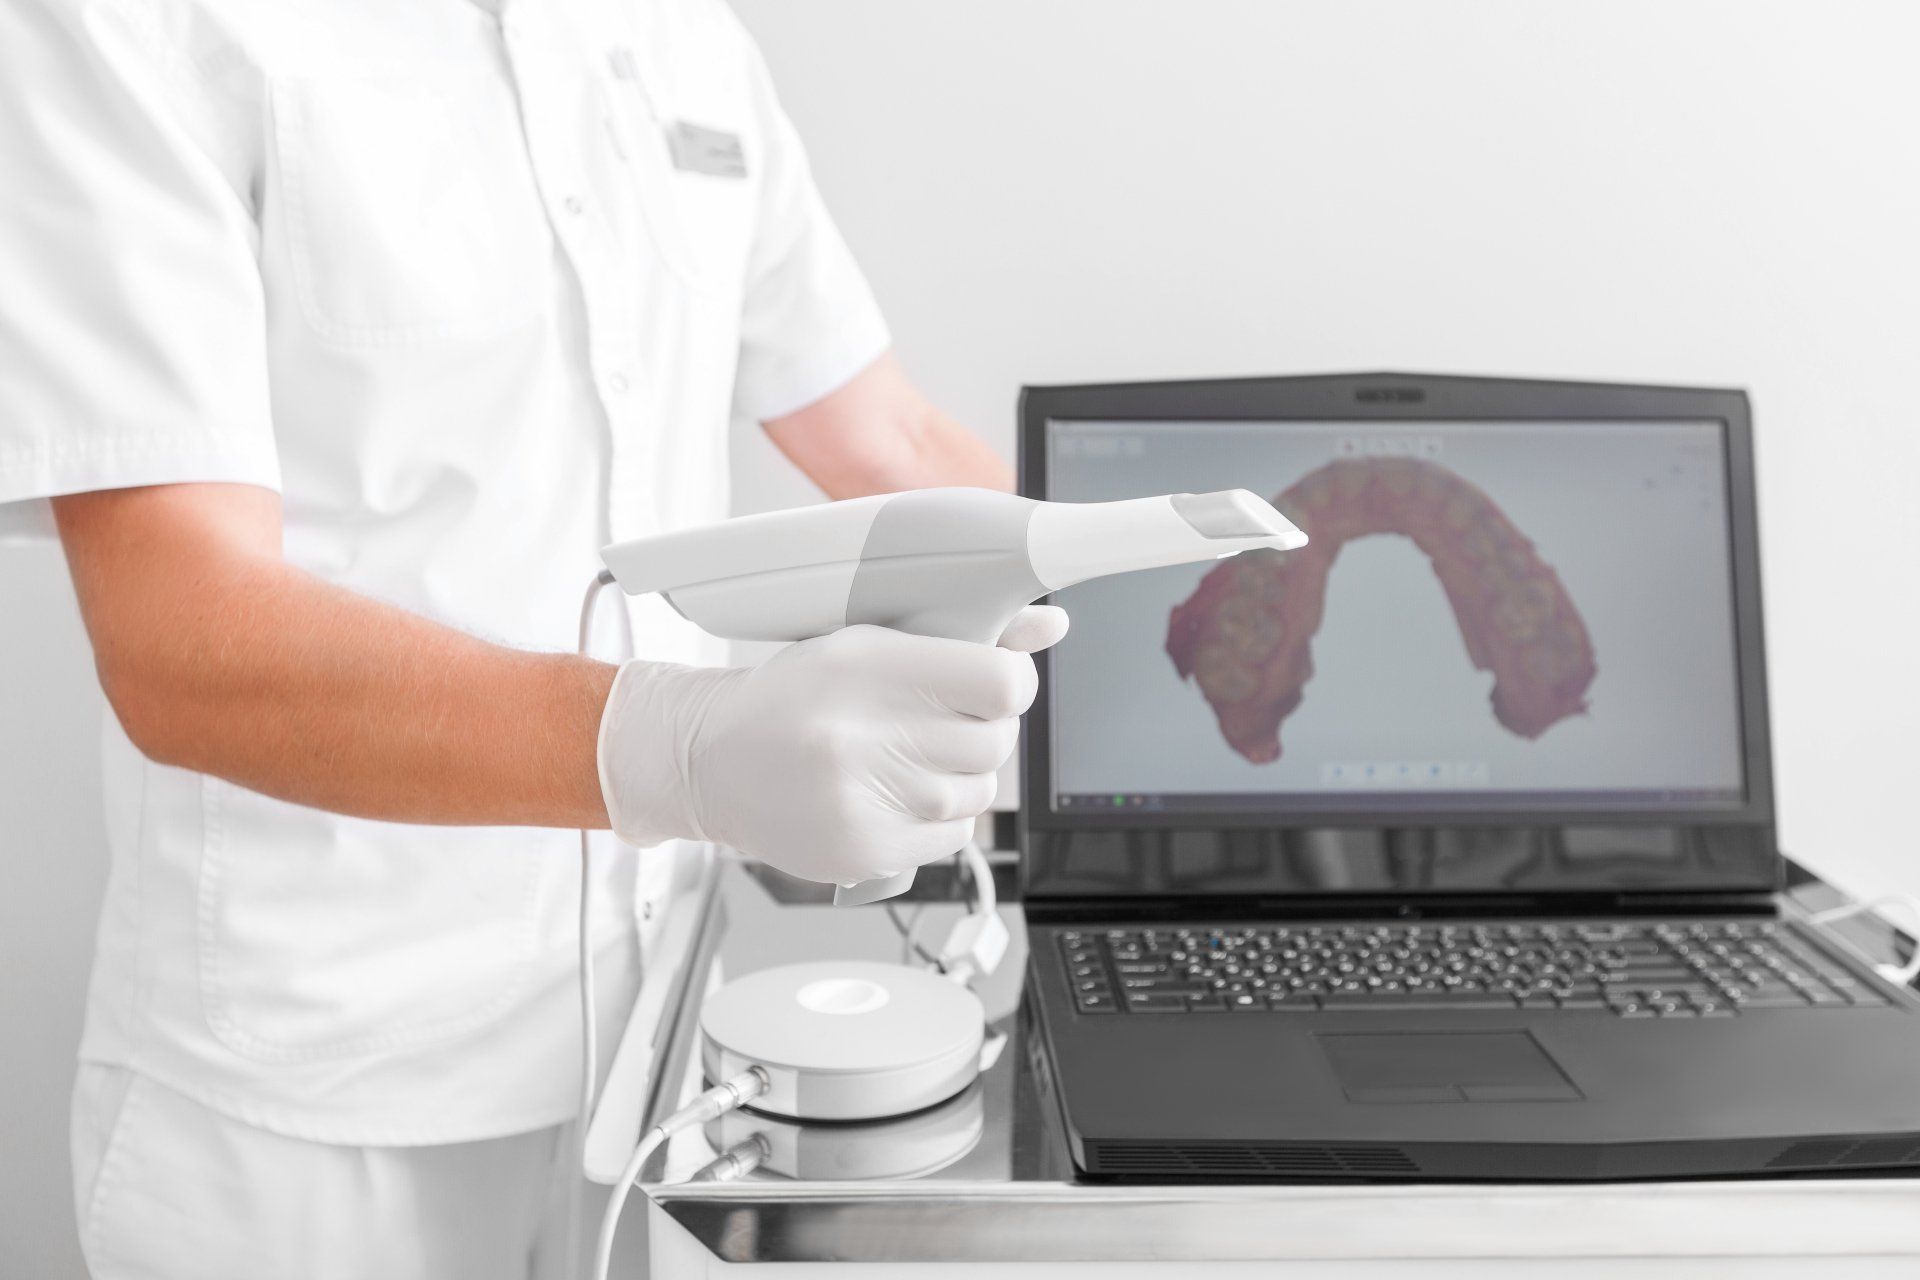 A dentist is holding a 3d scanner in front of a laptop computer.